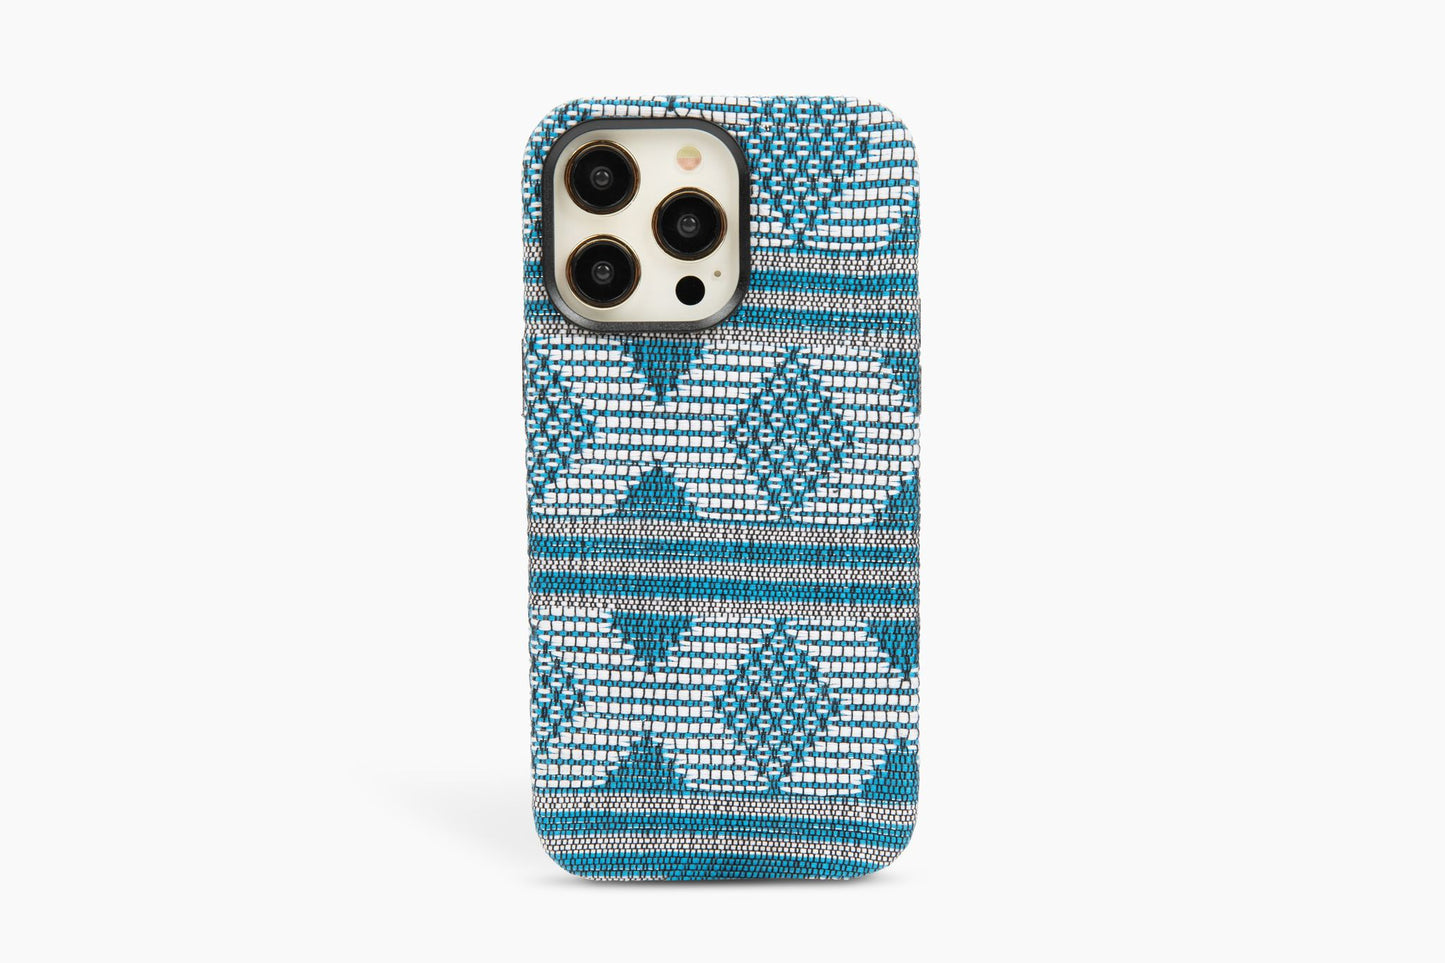 Bold and majestic patterned phone case on a white background, designed for iPhone 12, 13, and 14 Pro Max, showcases striking blue and white patterns that captivate and charm.